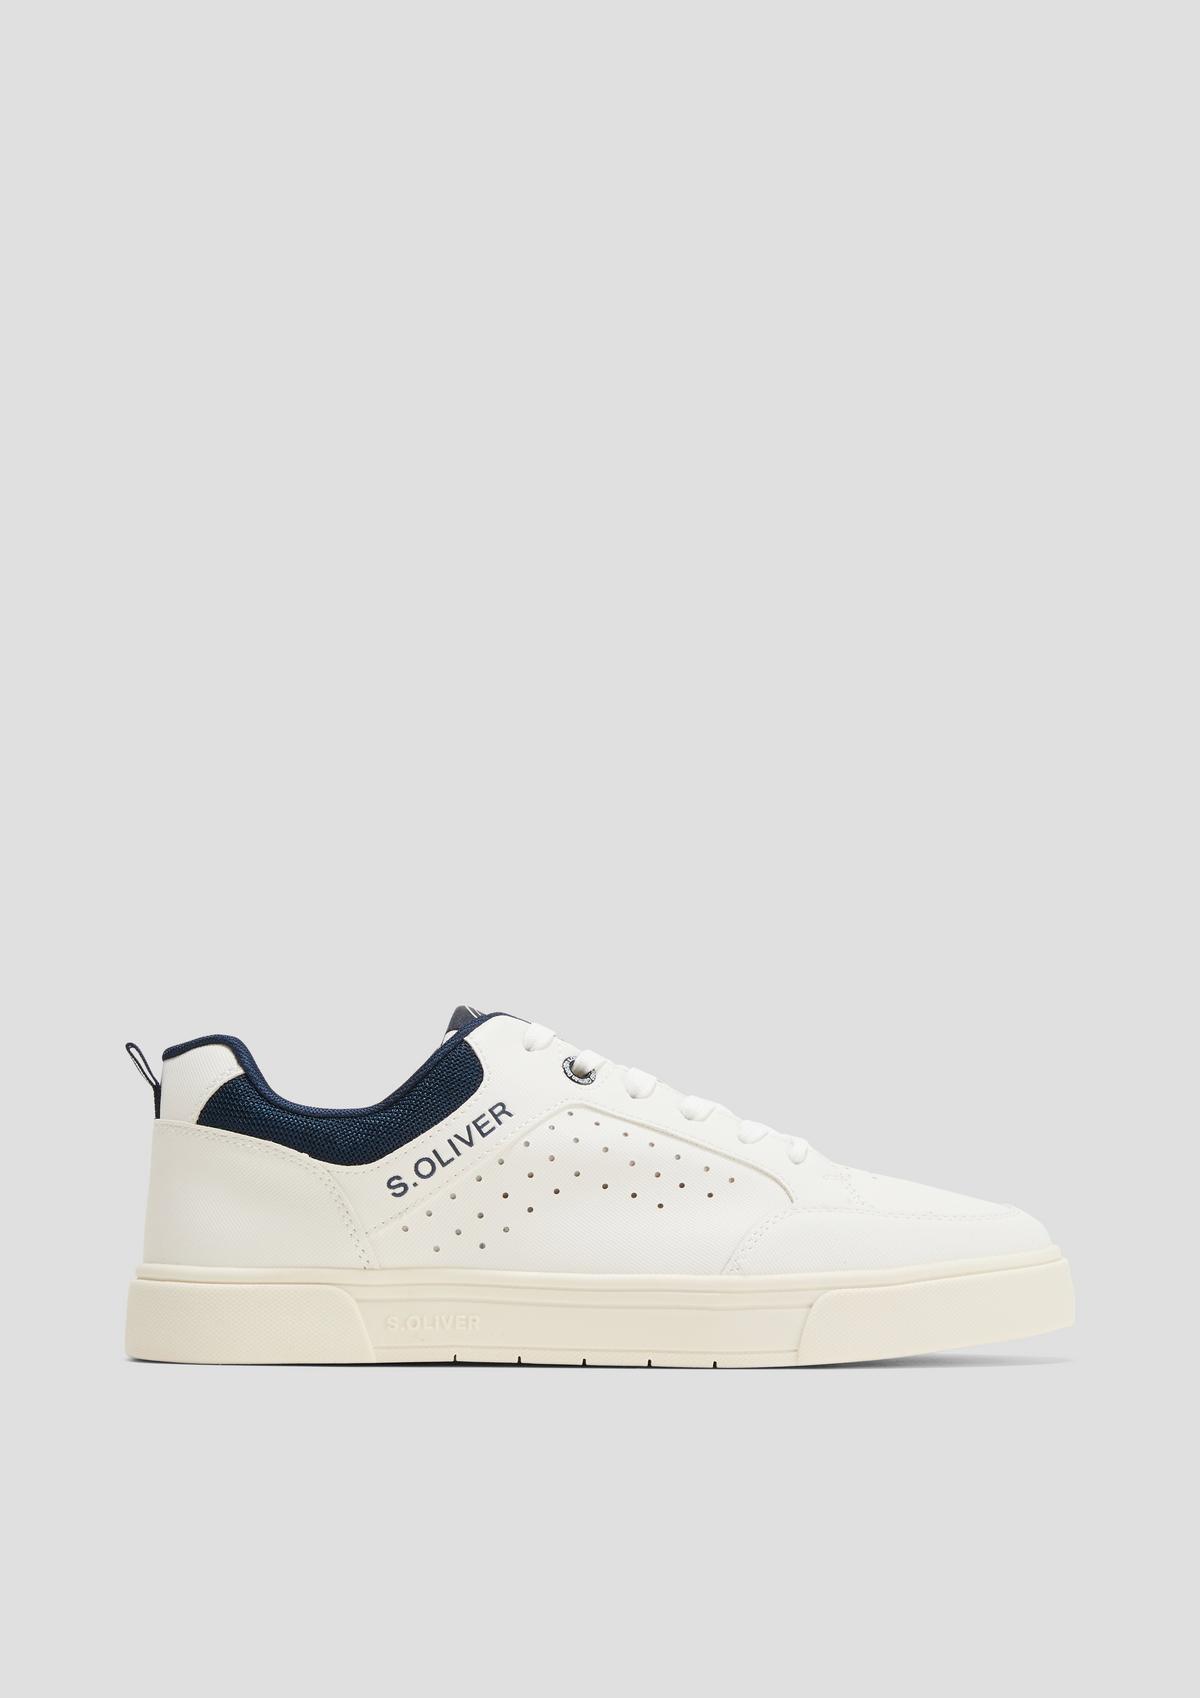 s.Oliver Cleane Sneaker mit Cut-out-Details